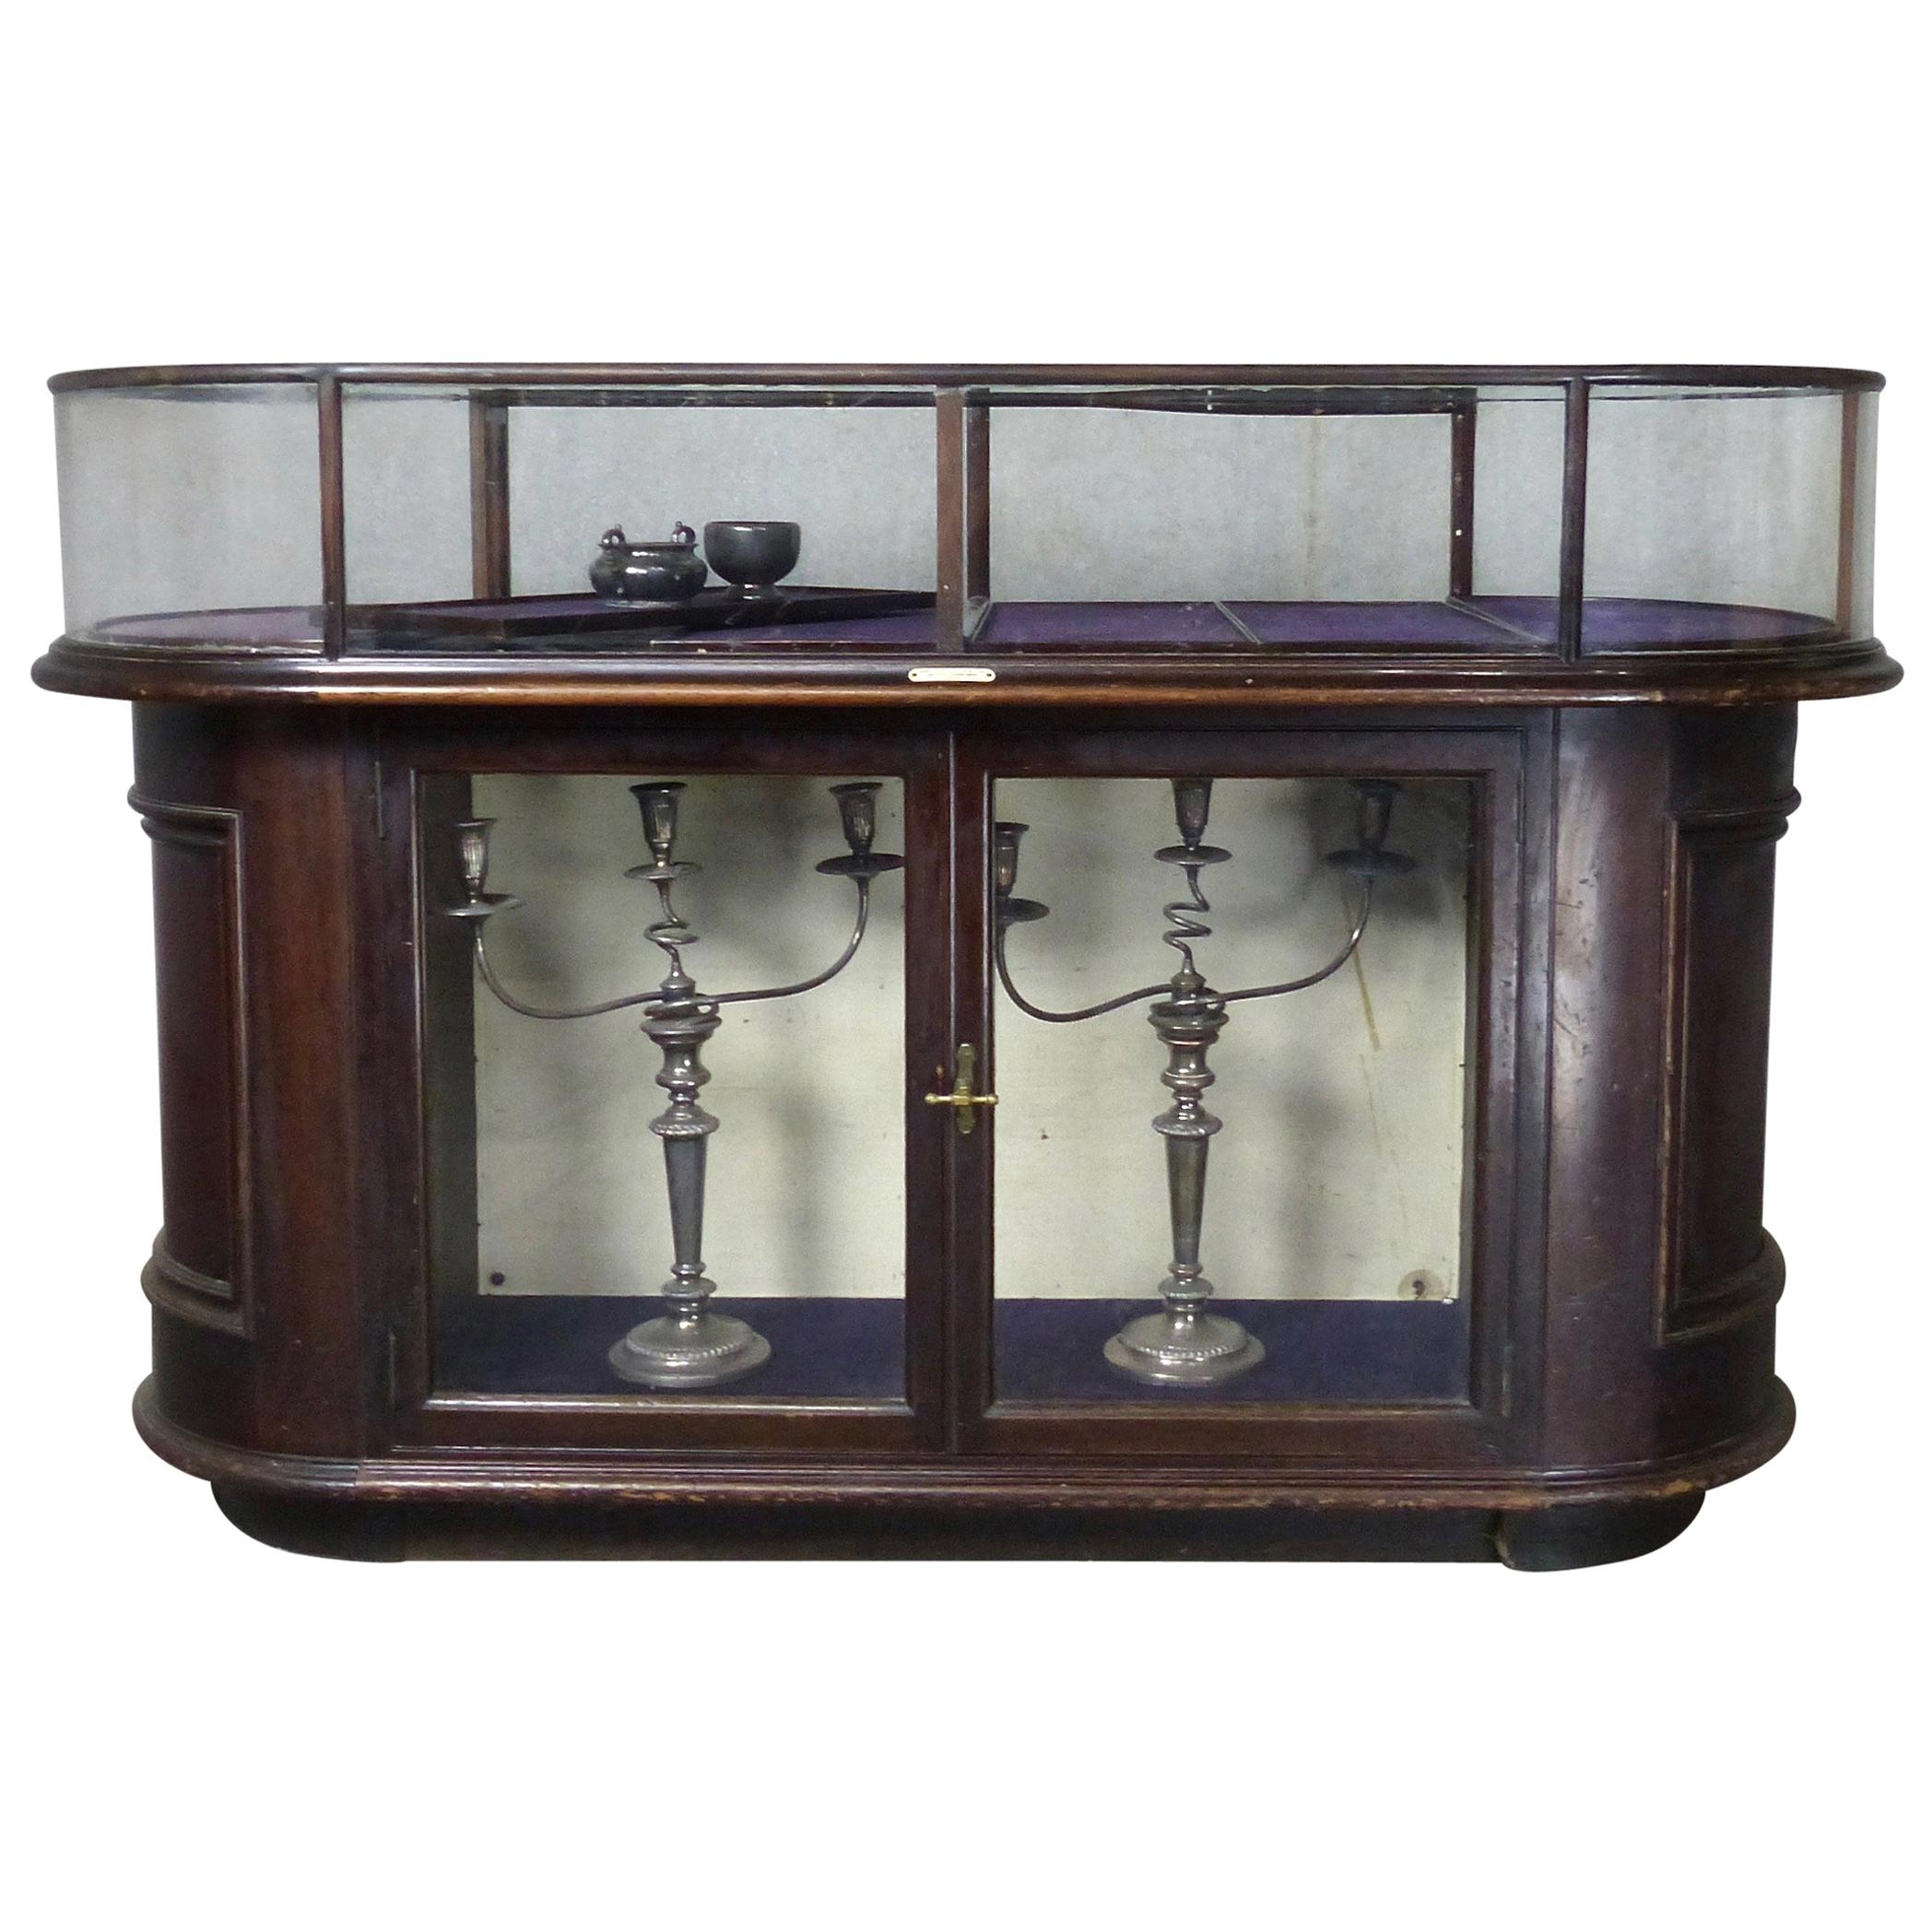 19th Century Victorian Curved Glass Display Case by Curtis, Leeds, England